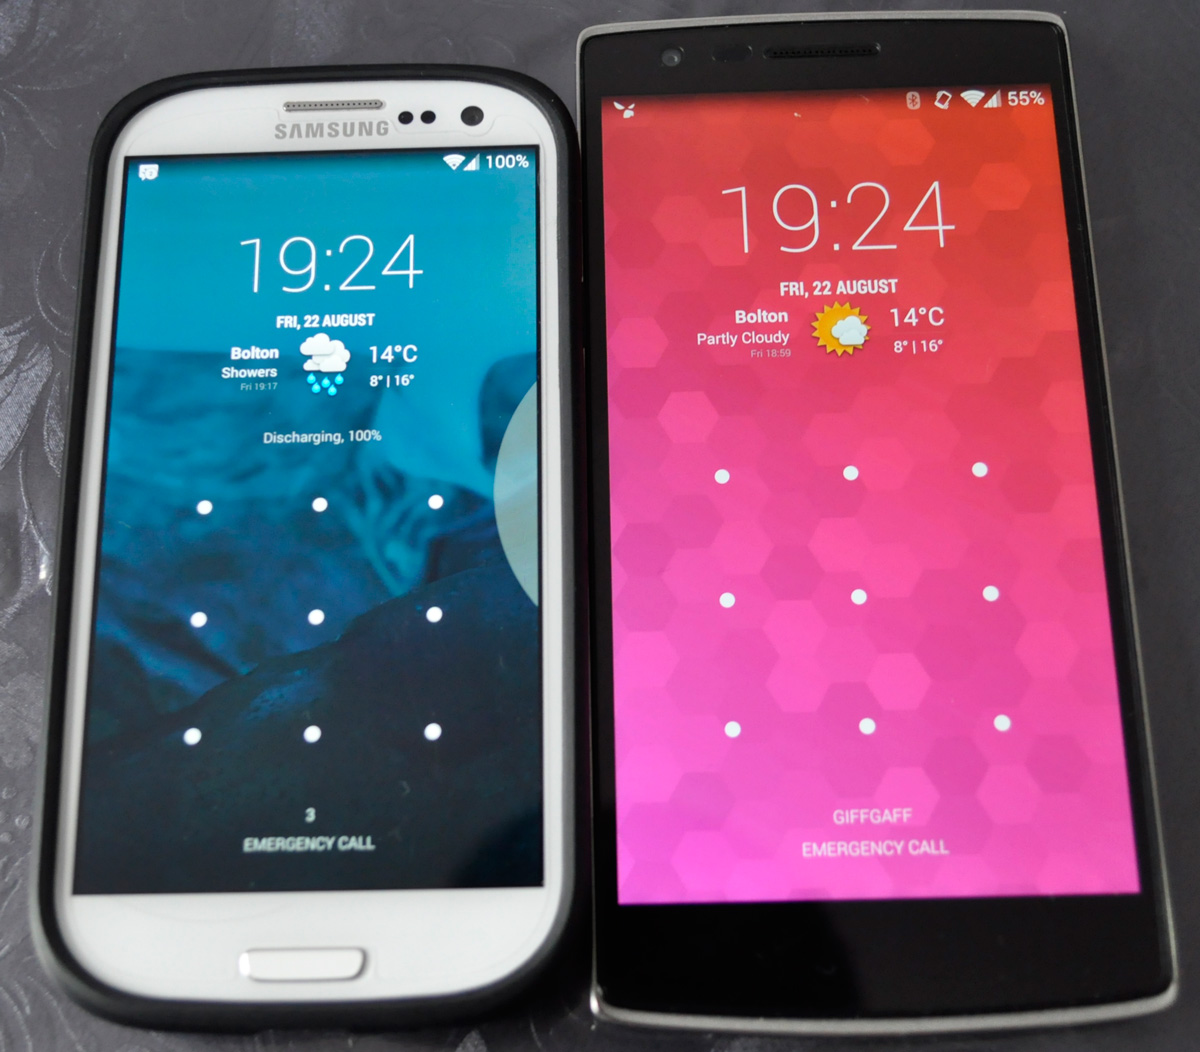 OnePlus One with Galaxy S3